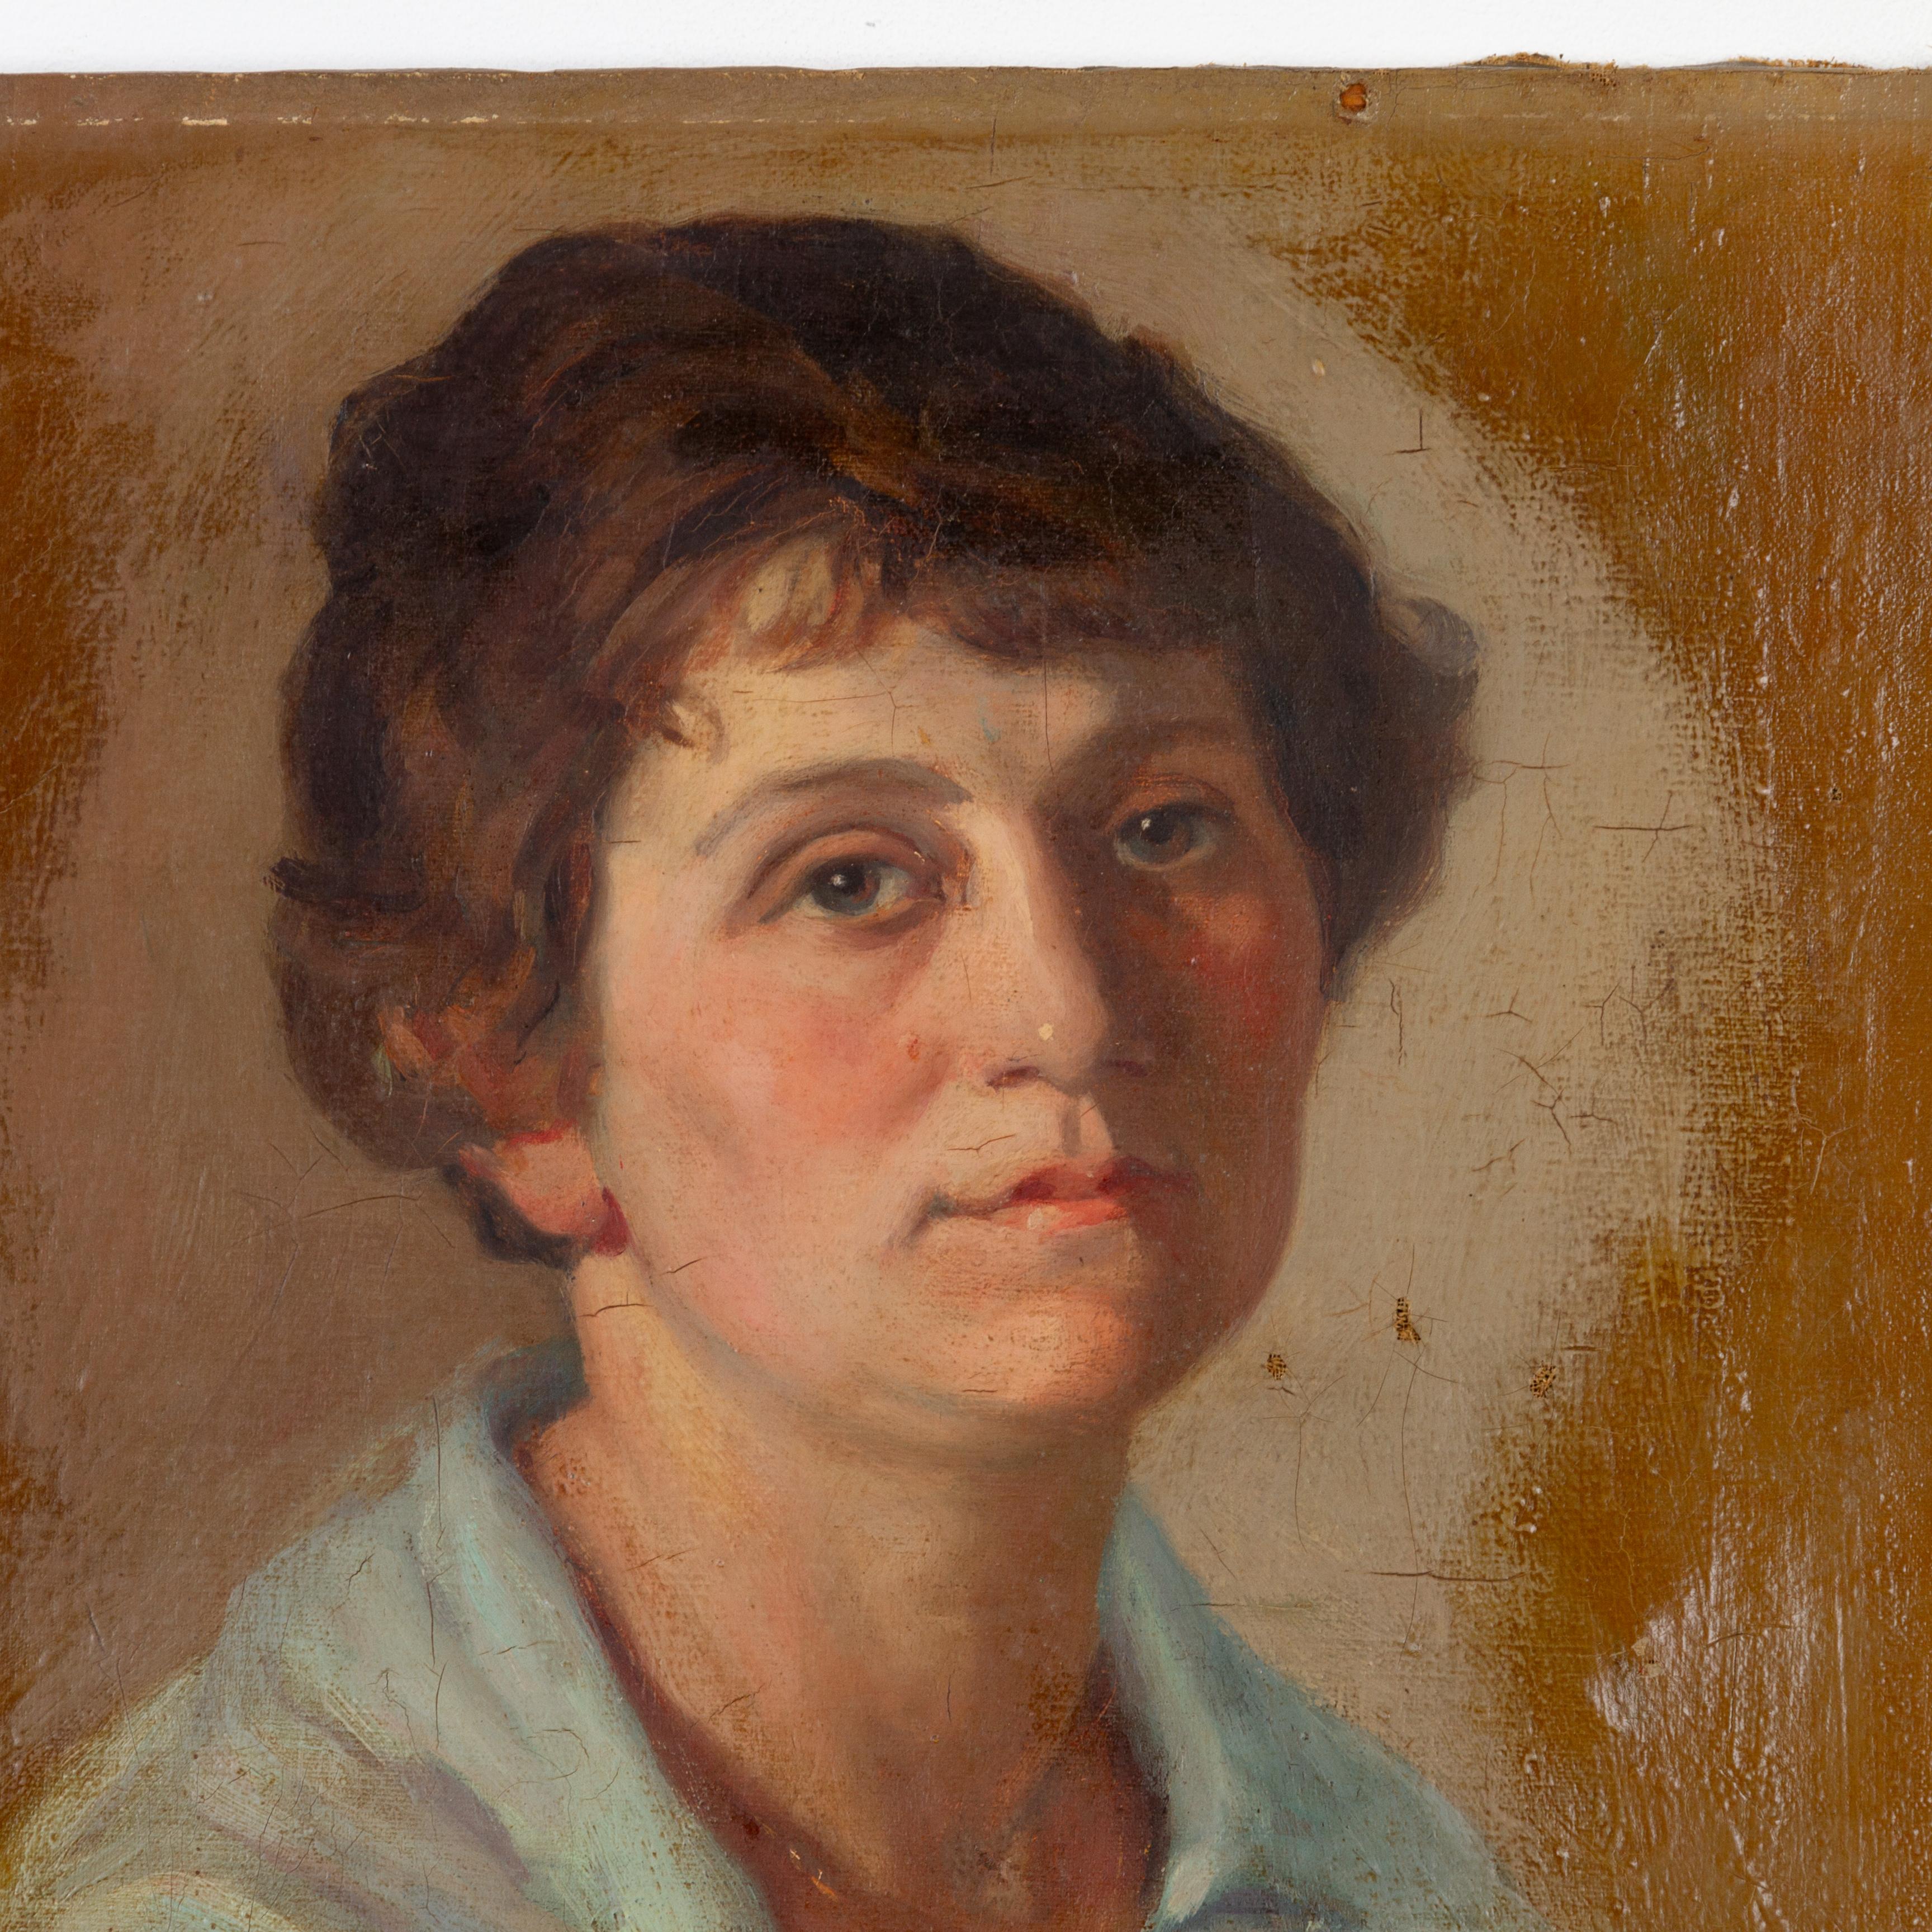 In good condition
From a private collection
Free international shipping
Wilson, Hugh Cameron (British 1885–1952) Signed Portrait Oil Painting 1918
Yellowed varnish surface, requires cleaning.